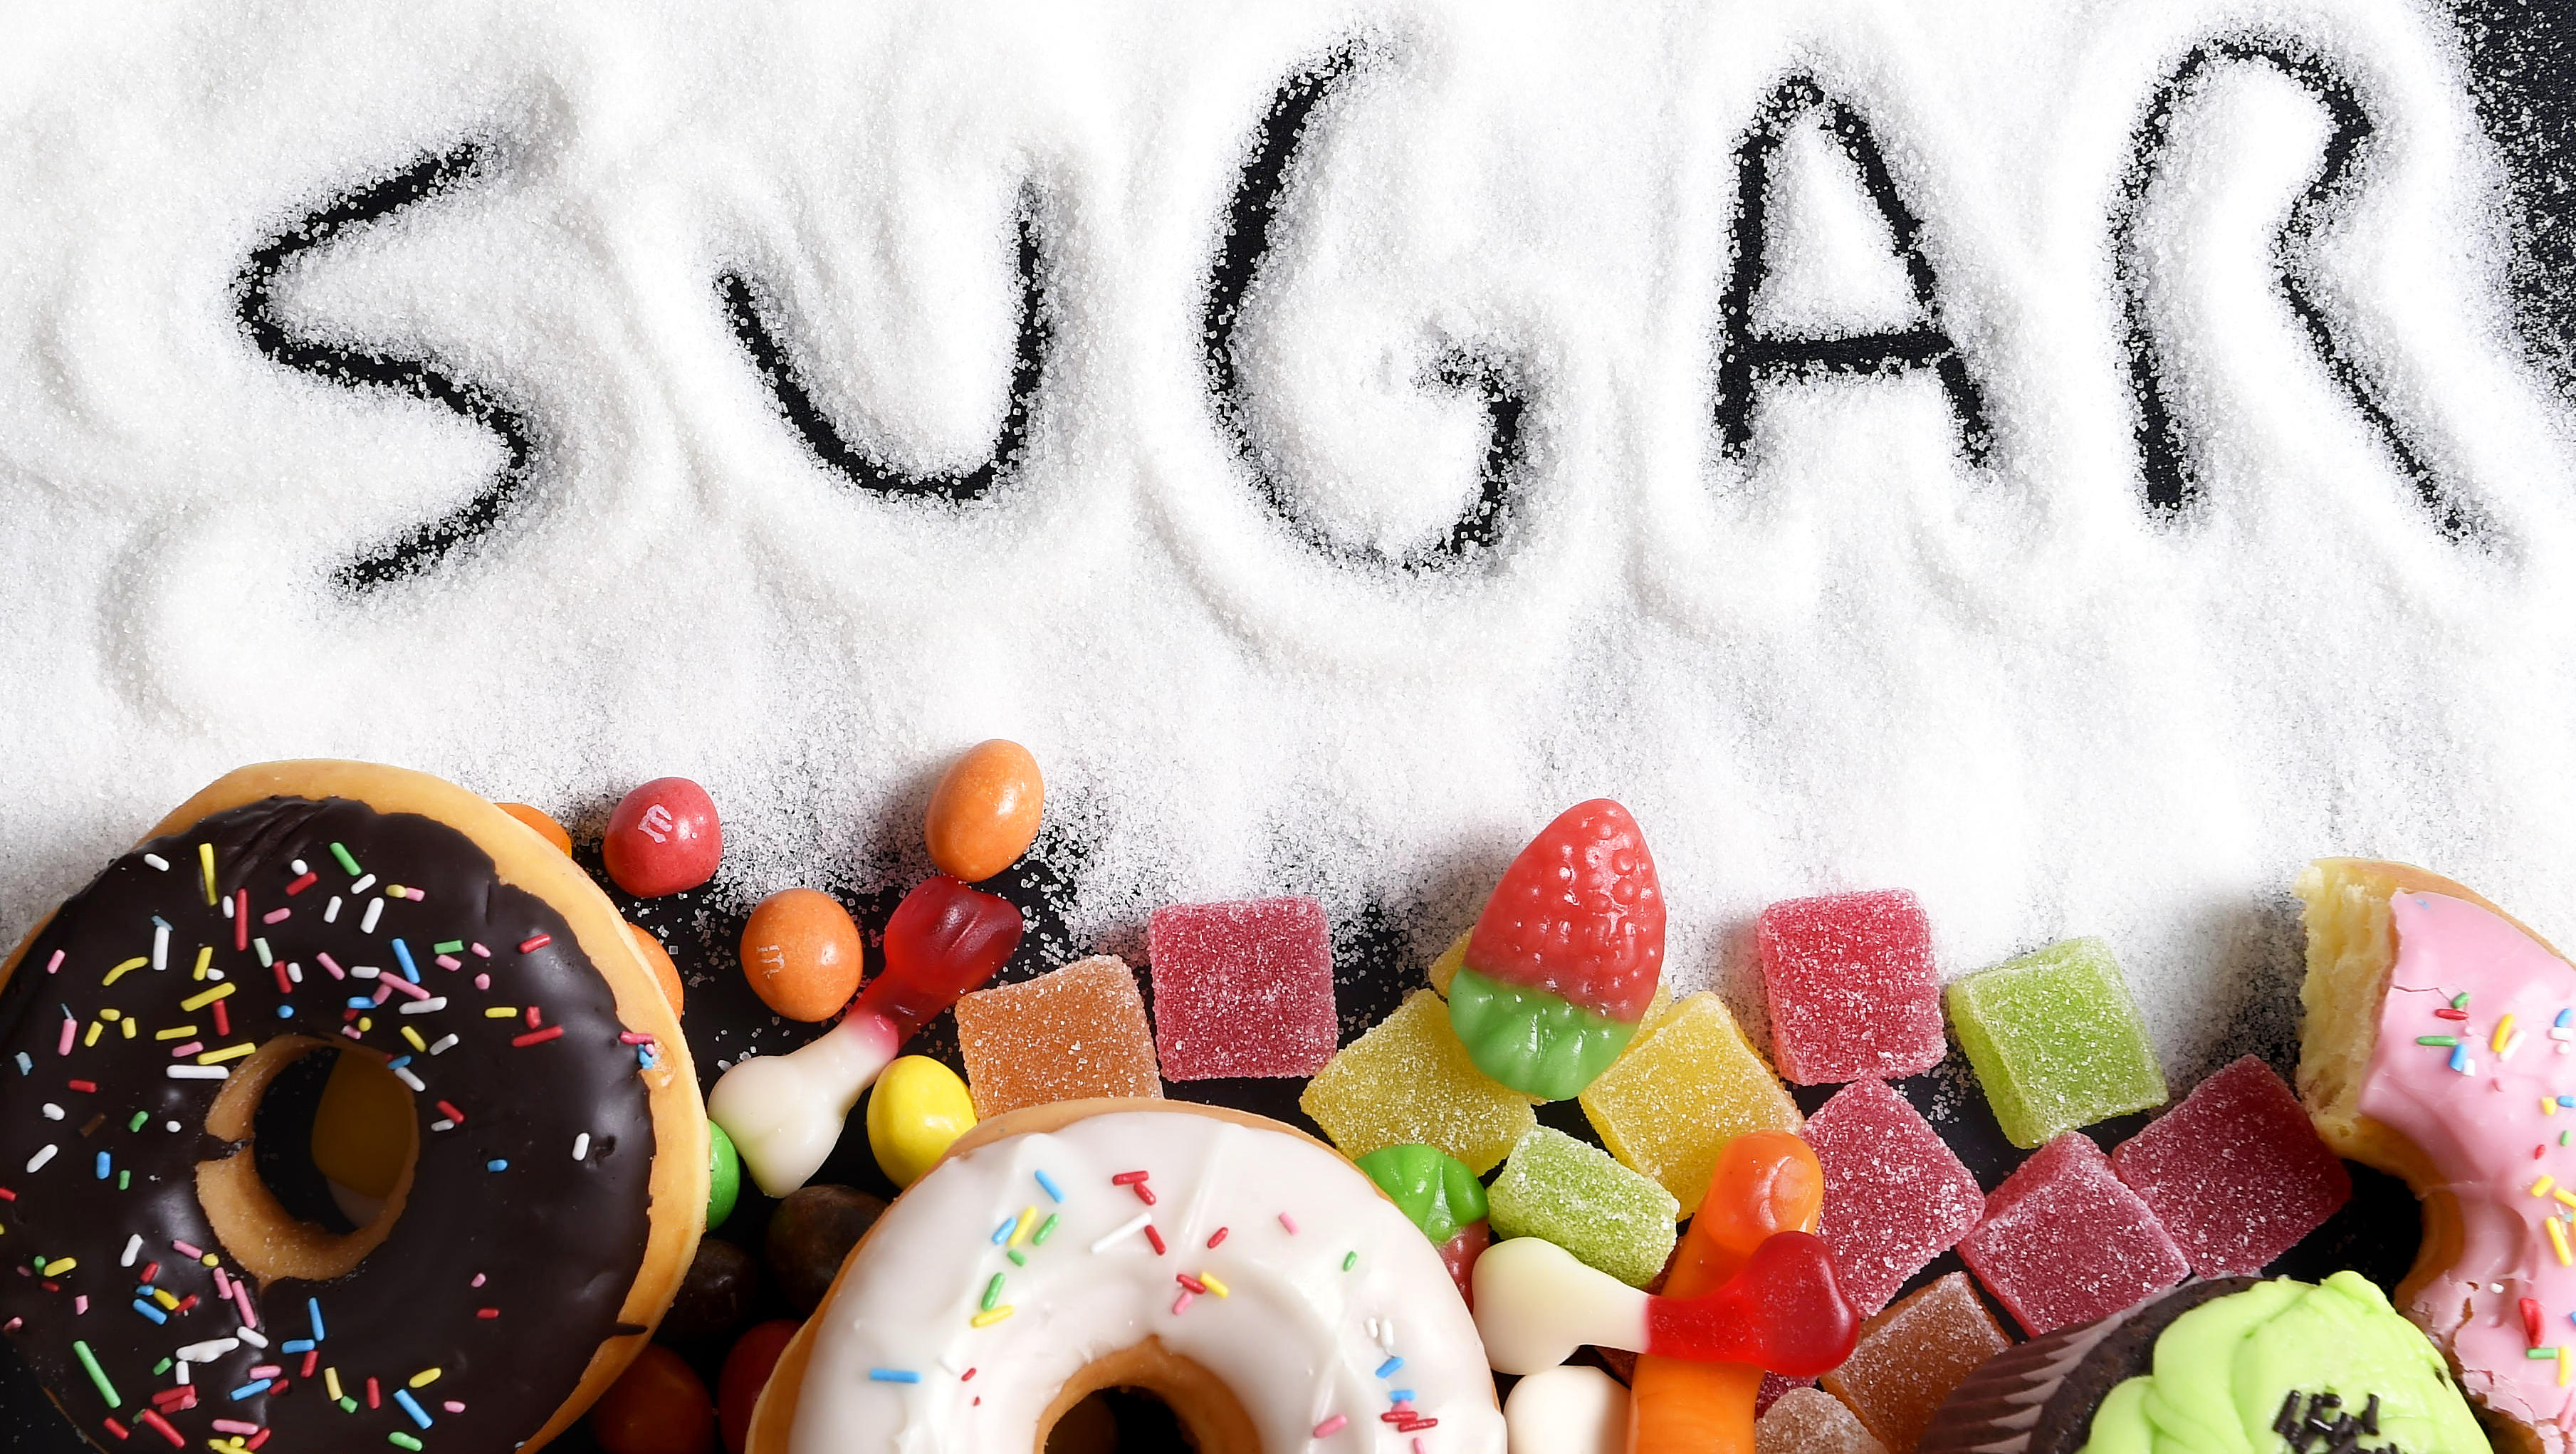 Can eating too much sugar cause type 2 diabetes? - CBS News